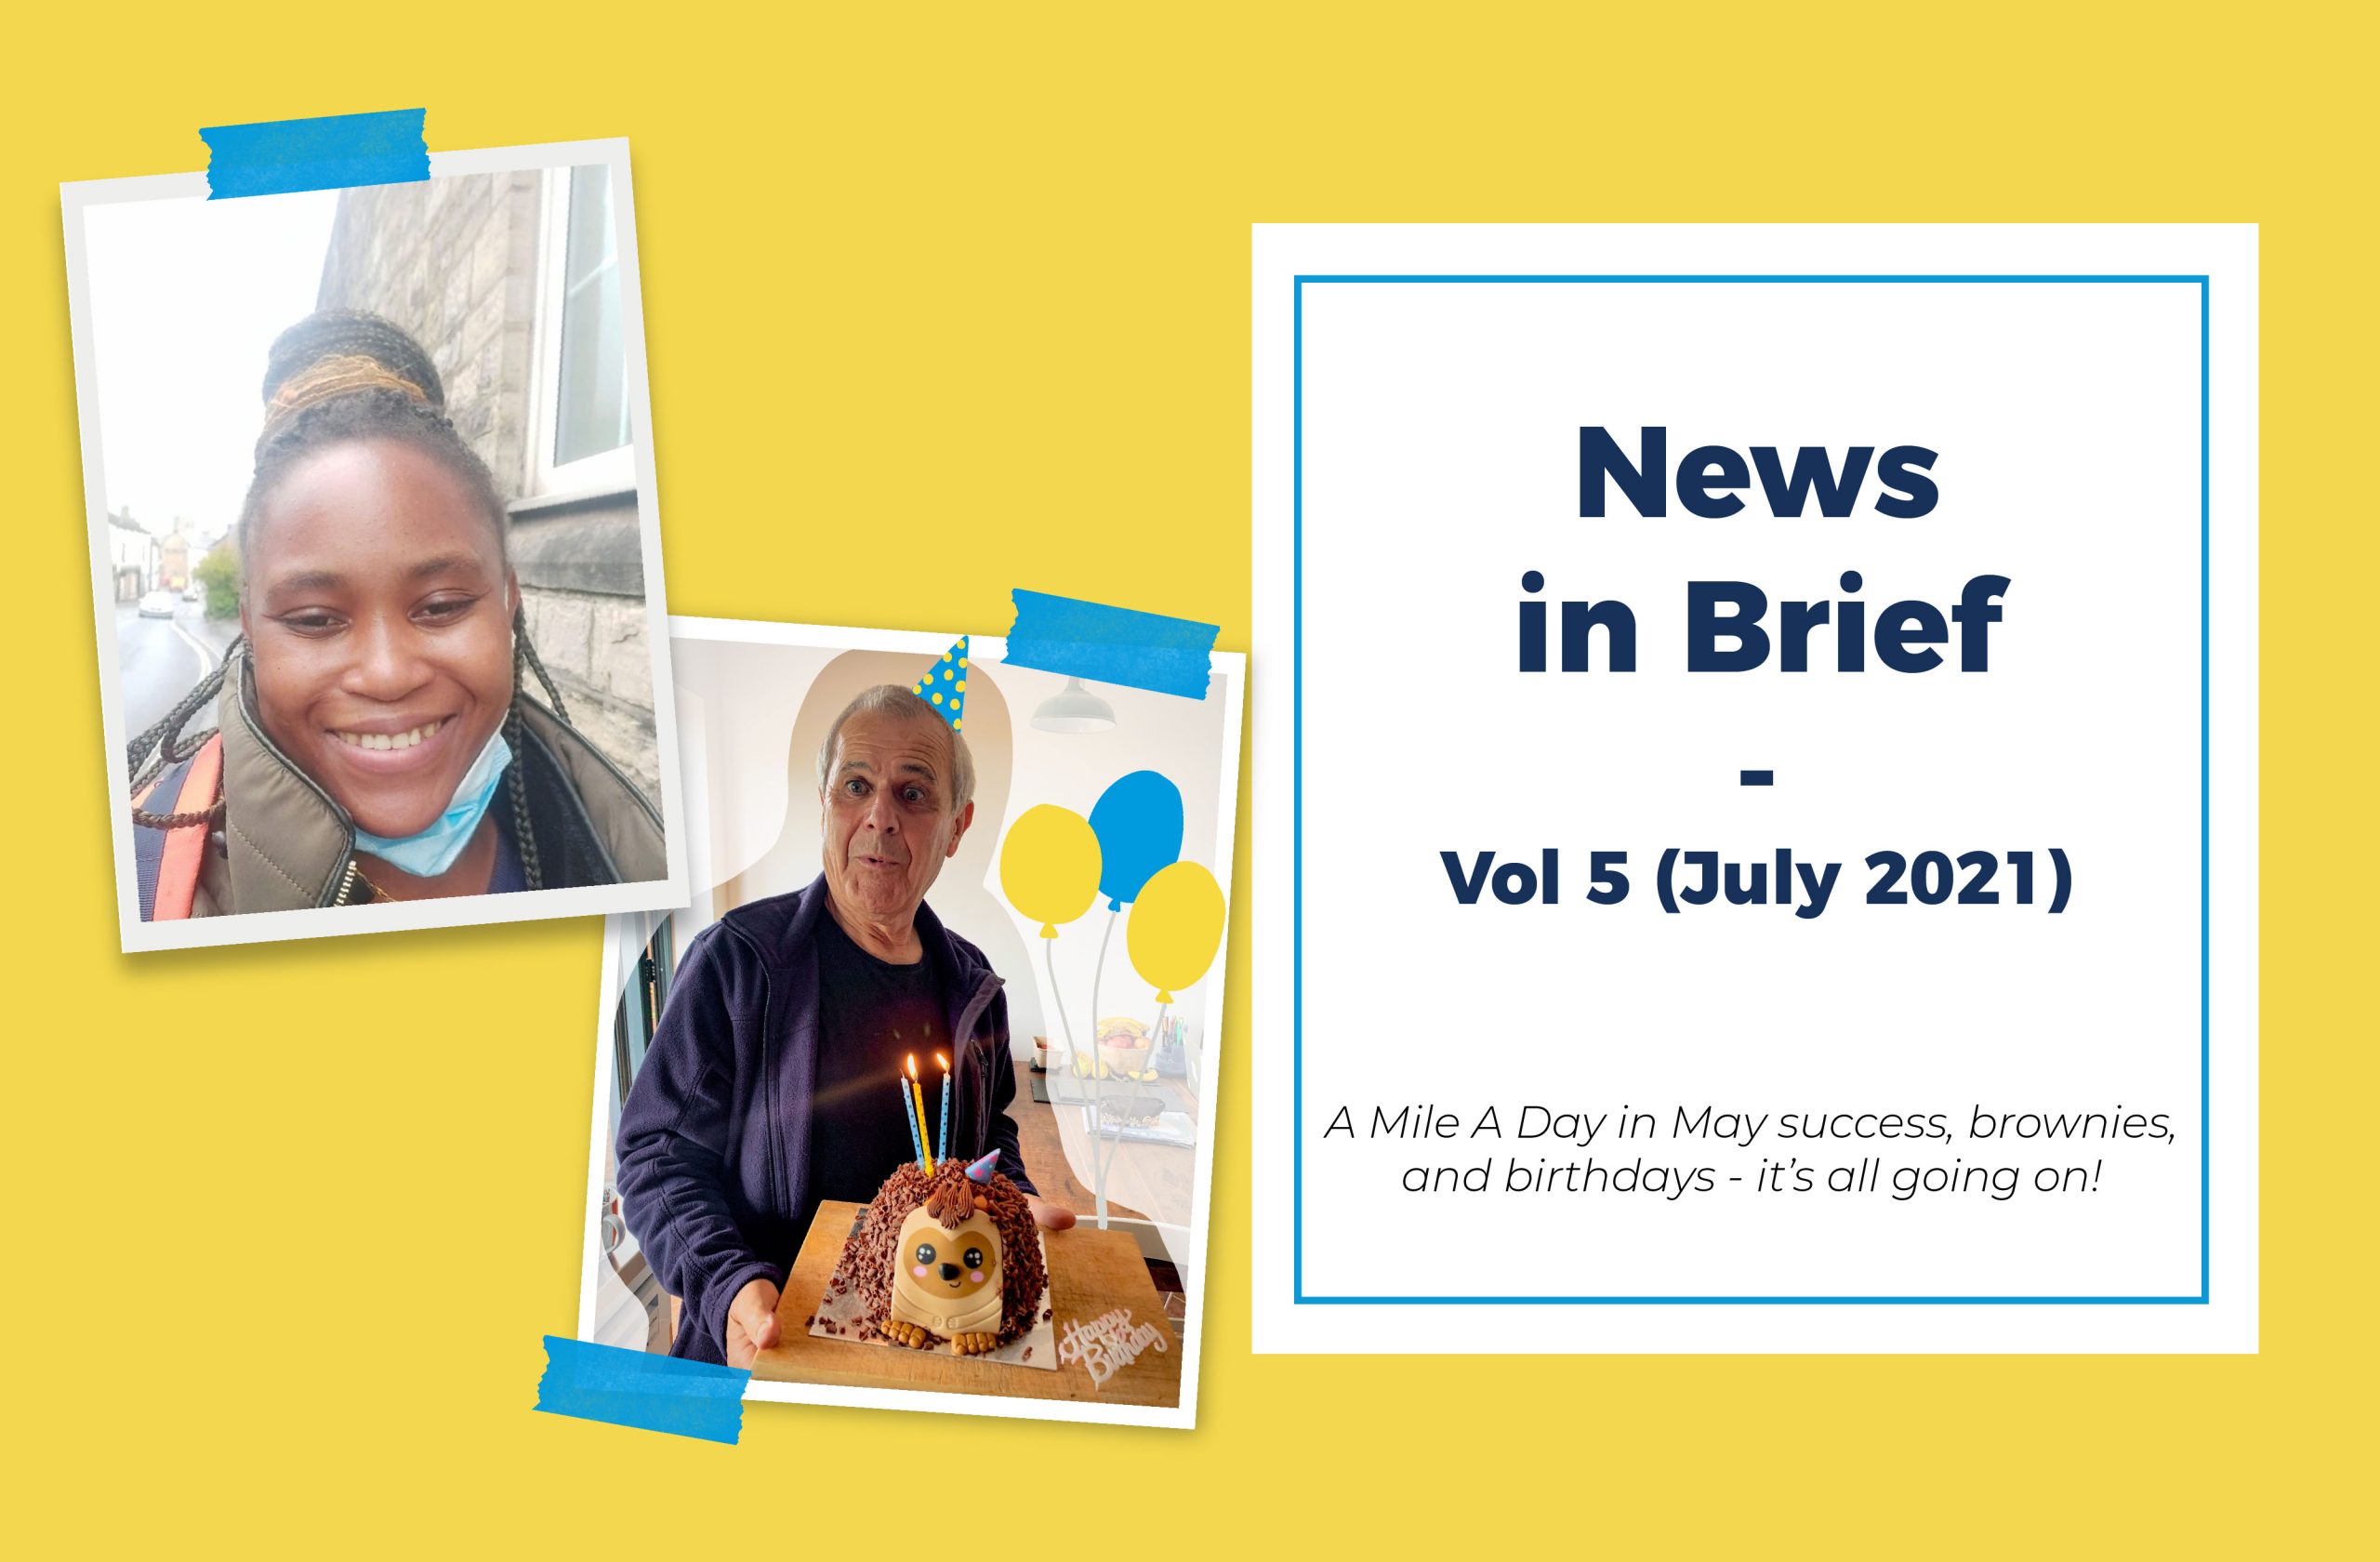 Two photos, one of a young black woman and the other of an older white man, are stuck on a yellow background next to a title "News in Brief - Vol 5 (July2021) A Mile A Day in May success, brownies, and birthdays - it's all going on!